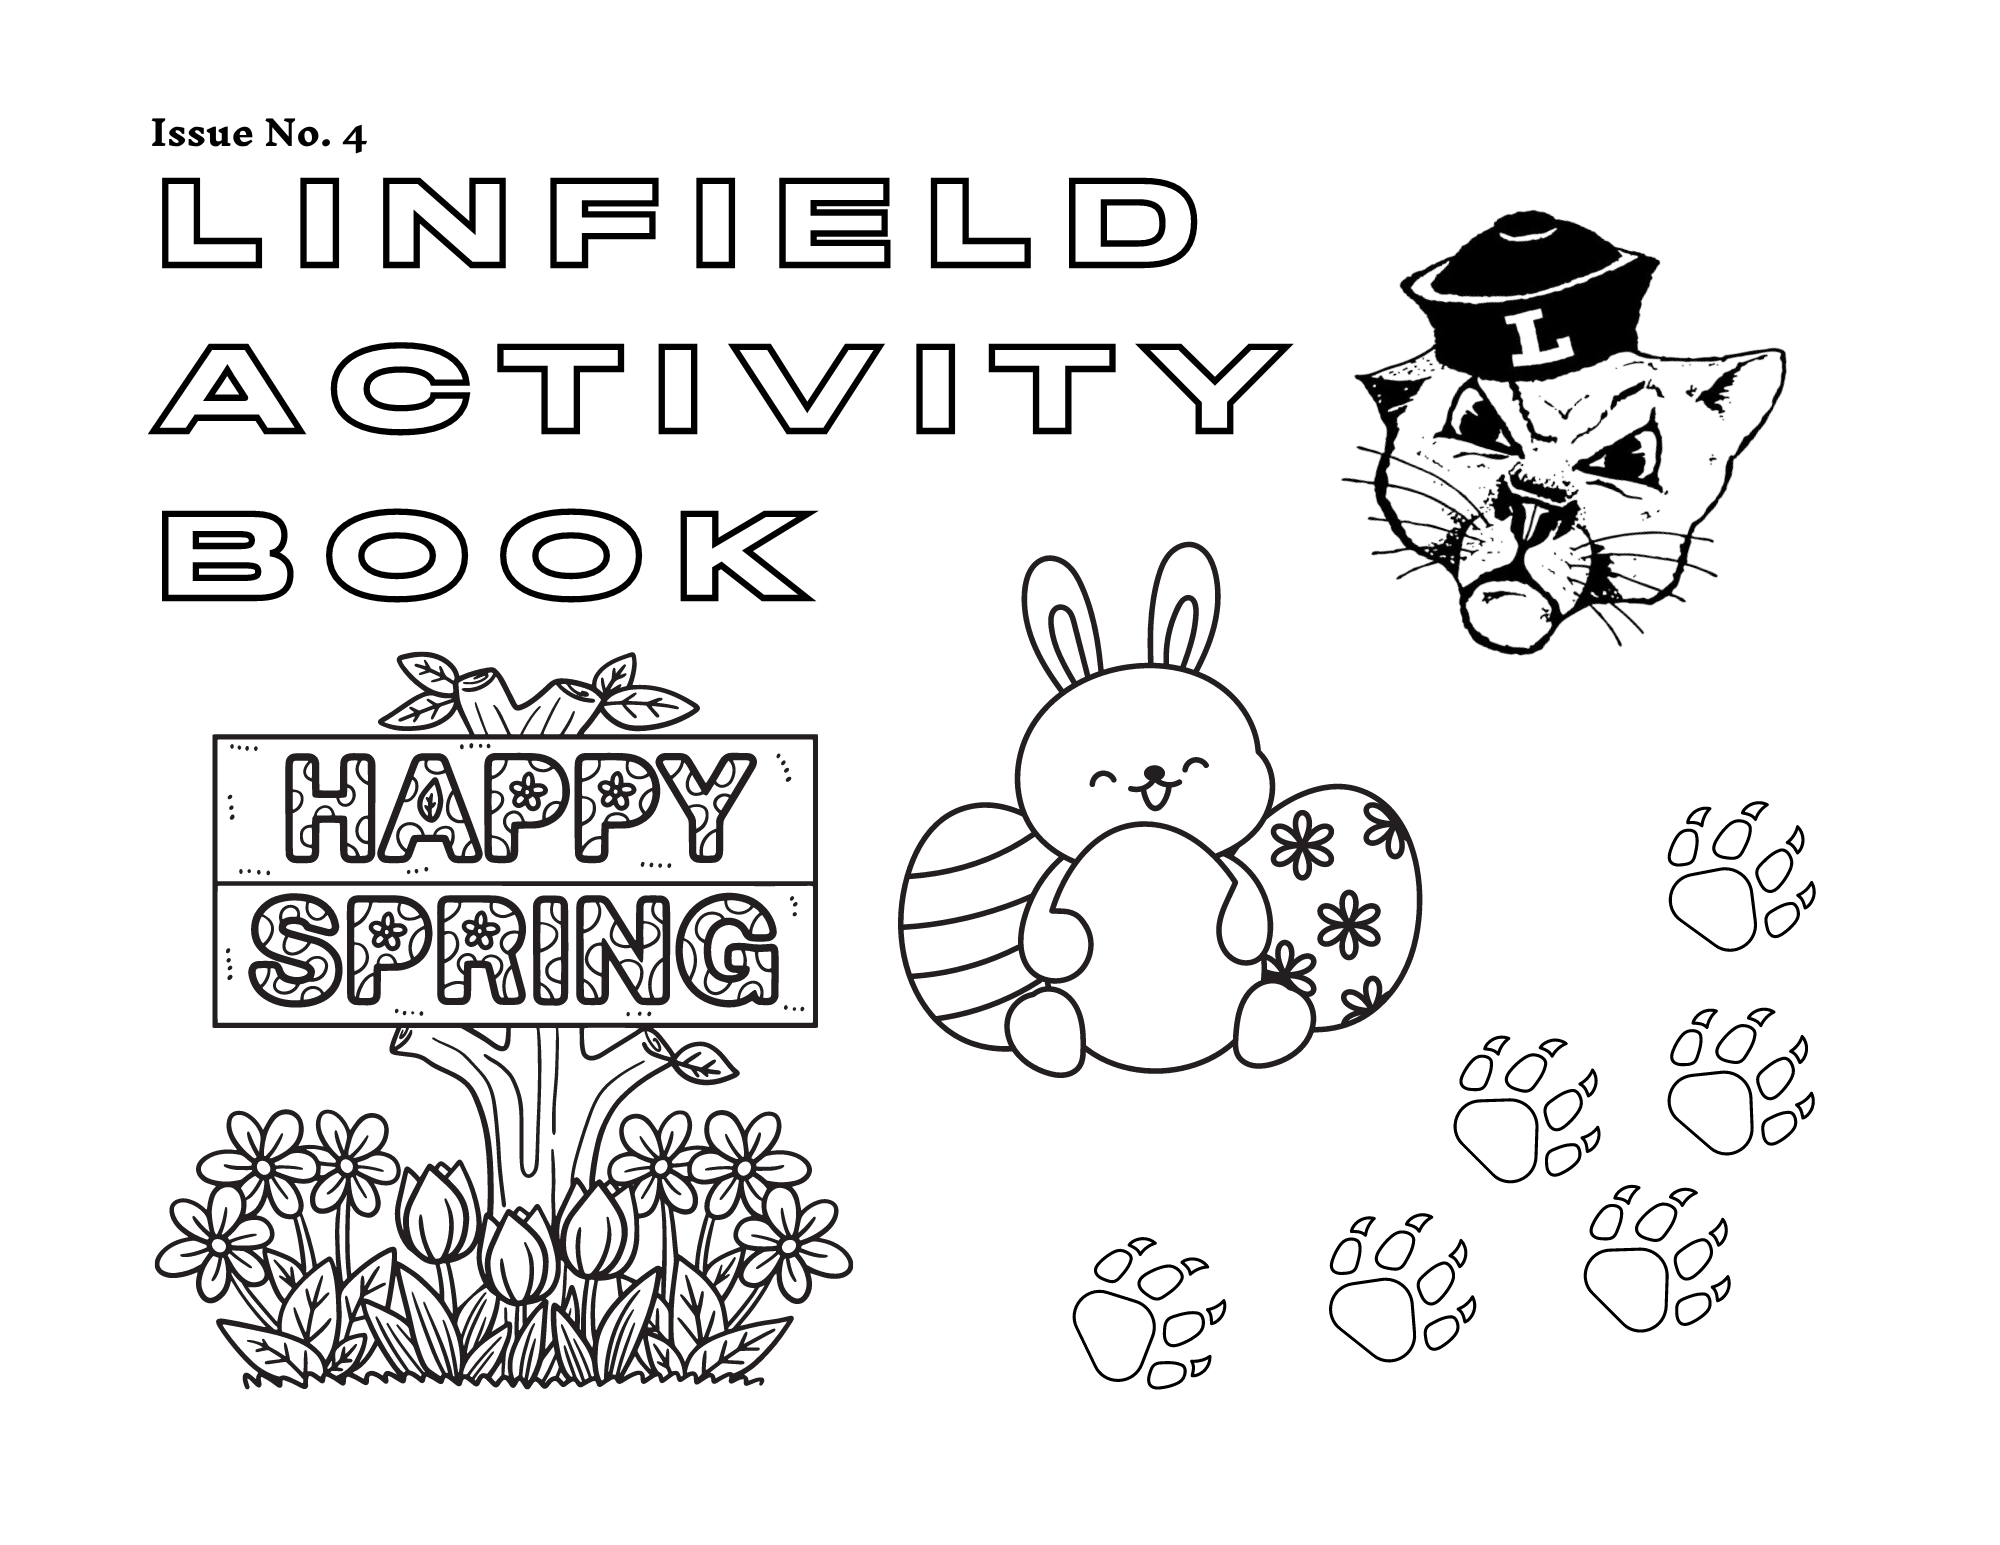 Holiday themed coloring page from the Linfield Activity Book.